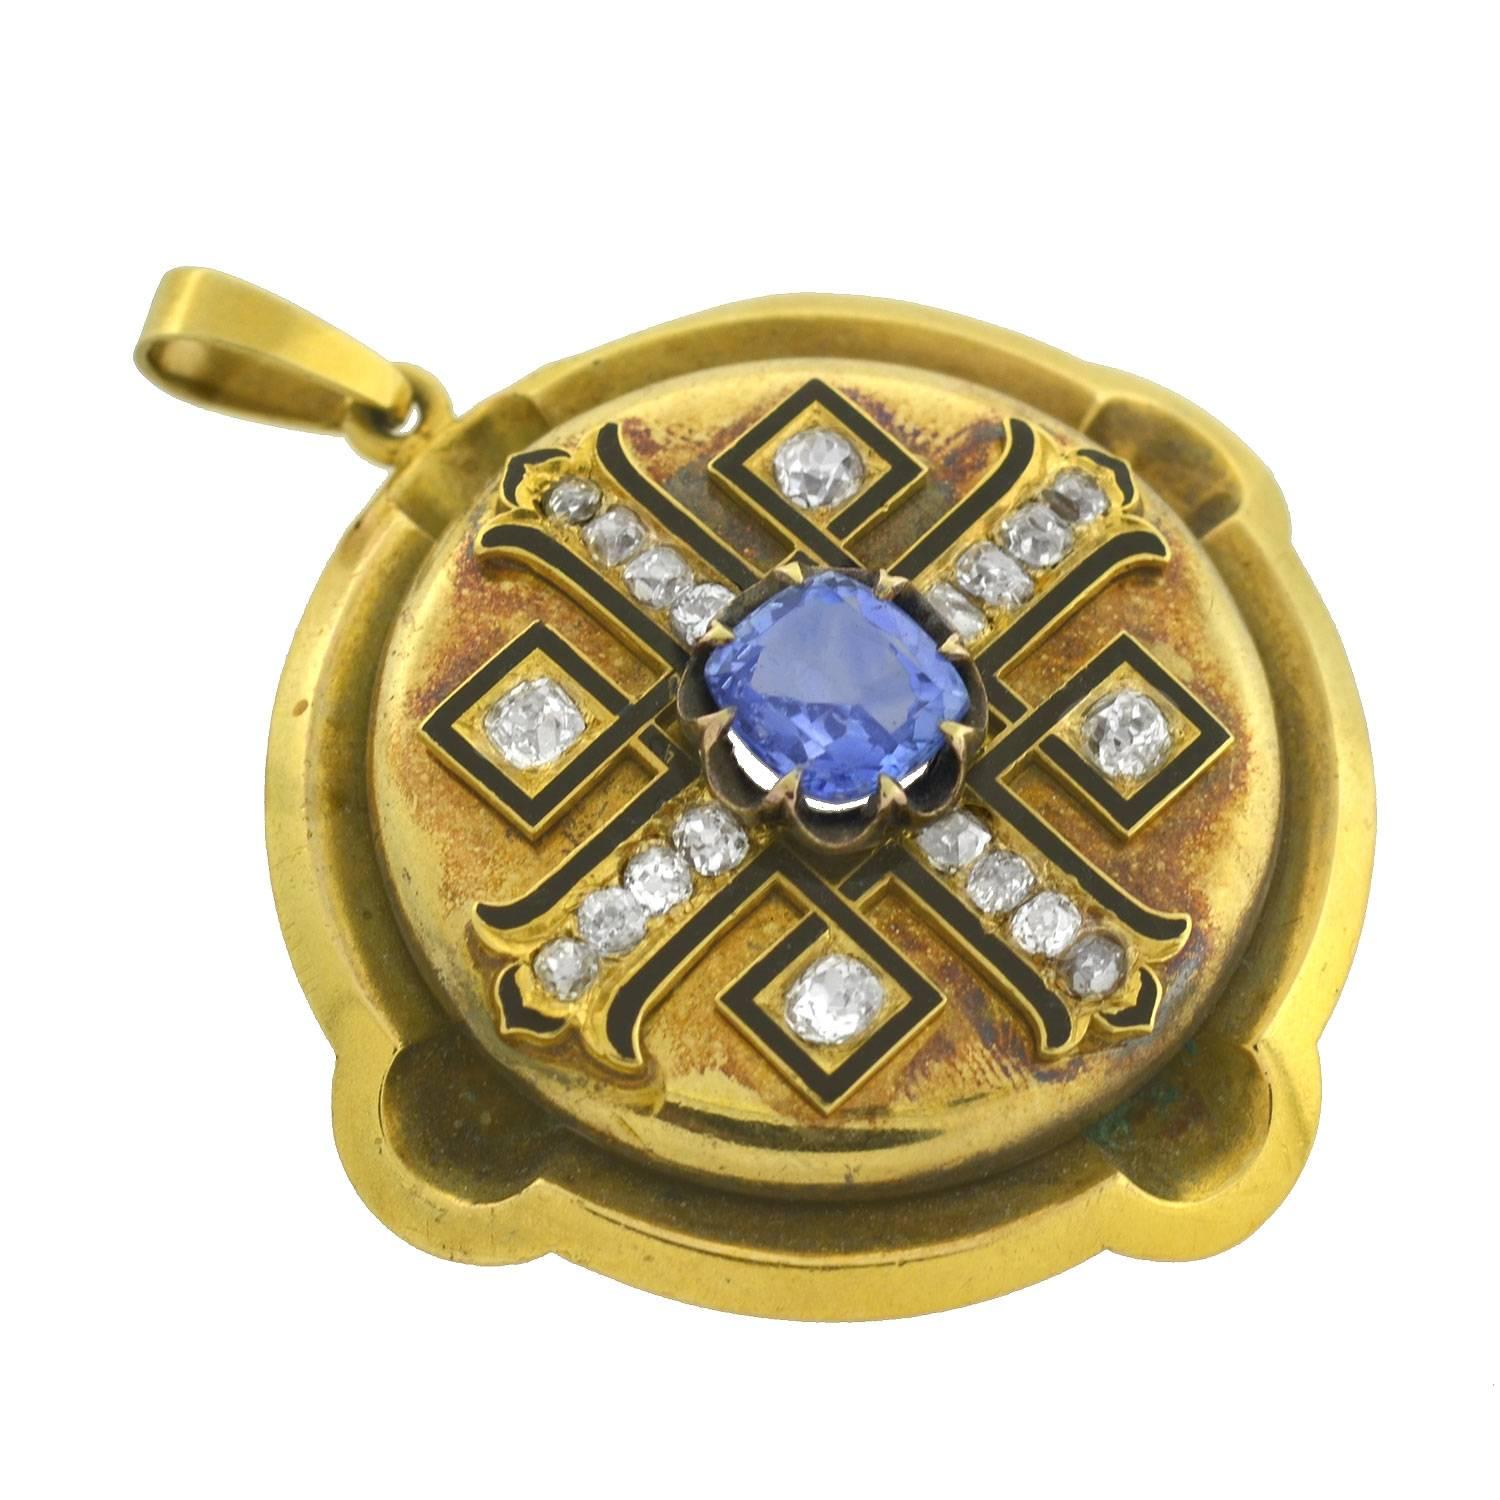 An incredible sapphire and diamond pendant from the Victorian (ca1880) era! This fabulous piece is made of 15kt yellow gold (indicating English origin) and has a brilliant multi stone design on the front surface. The pendant is round and substantial